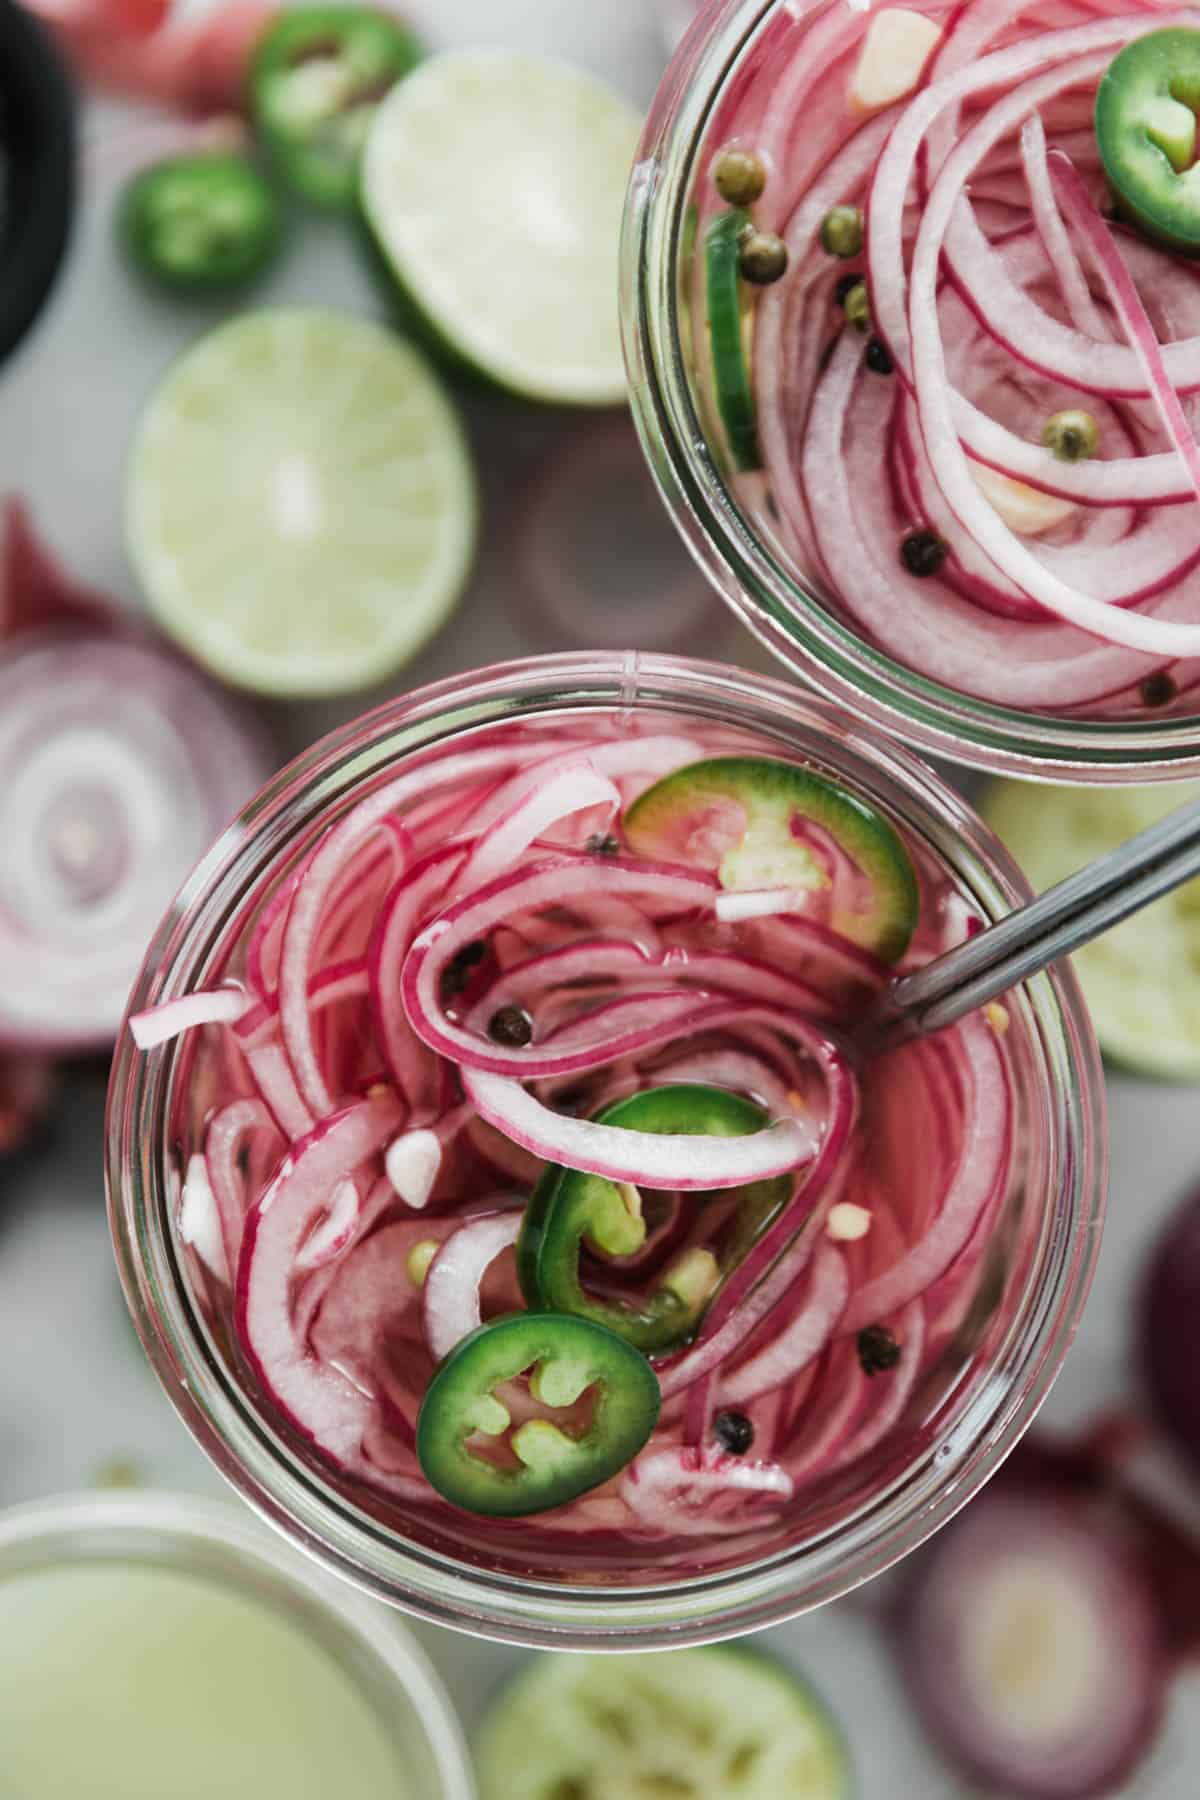 Two jars filled with sliced red onions vinegar, spices and sliced jalapeños.